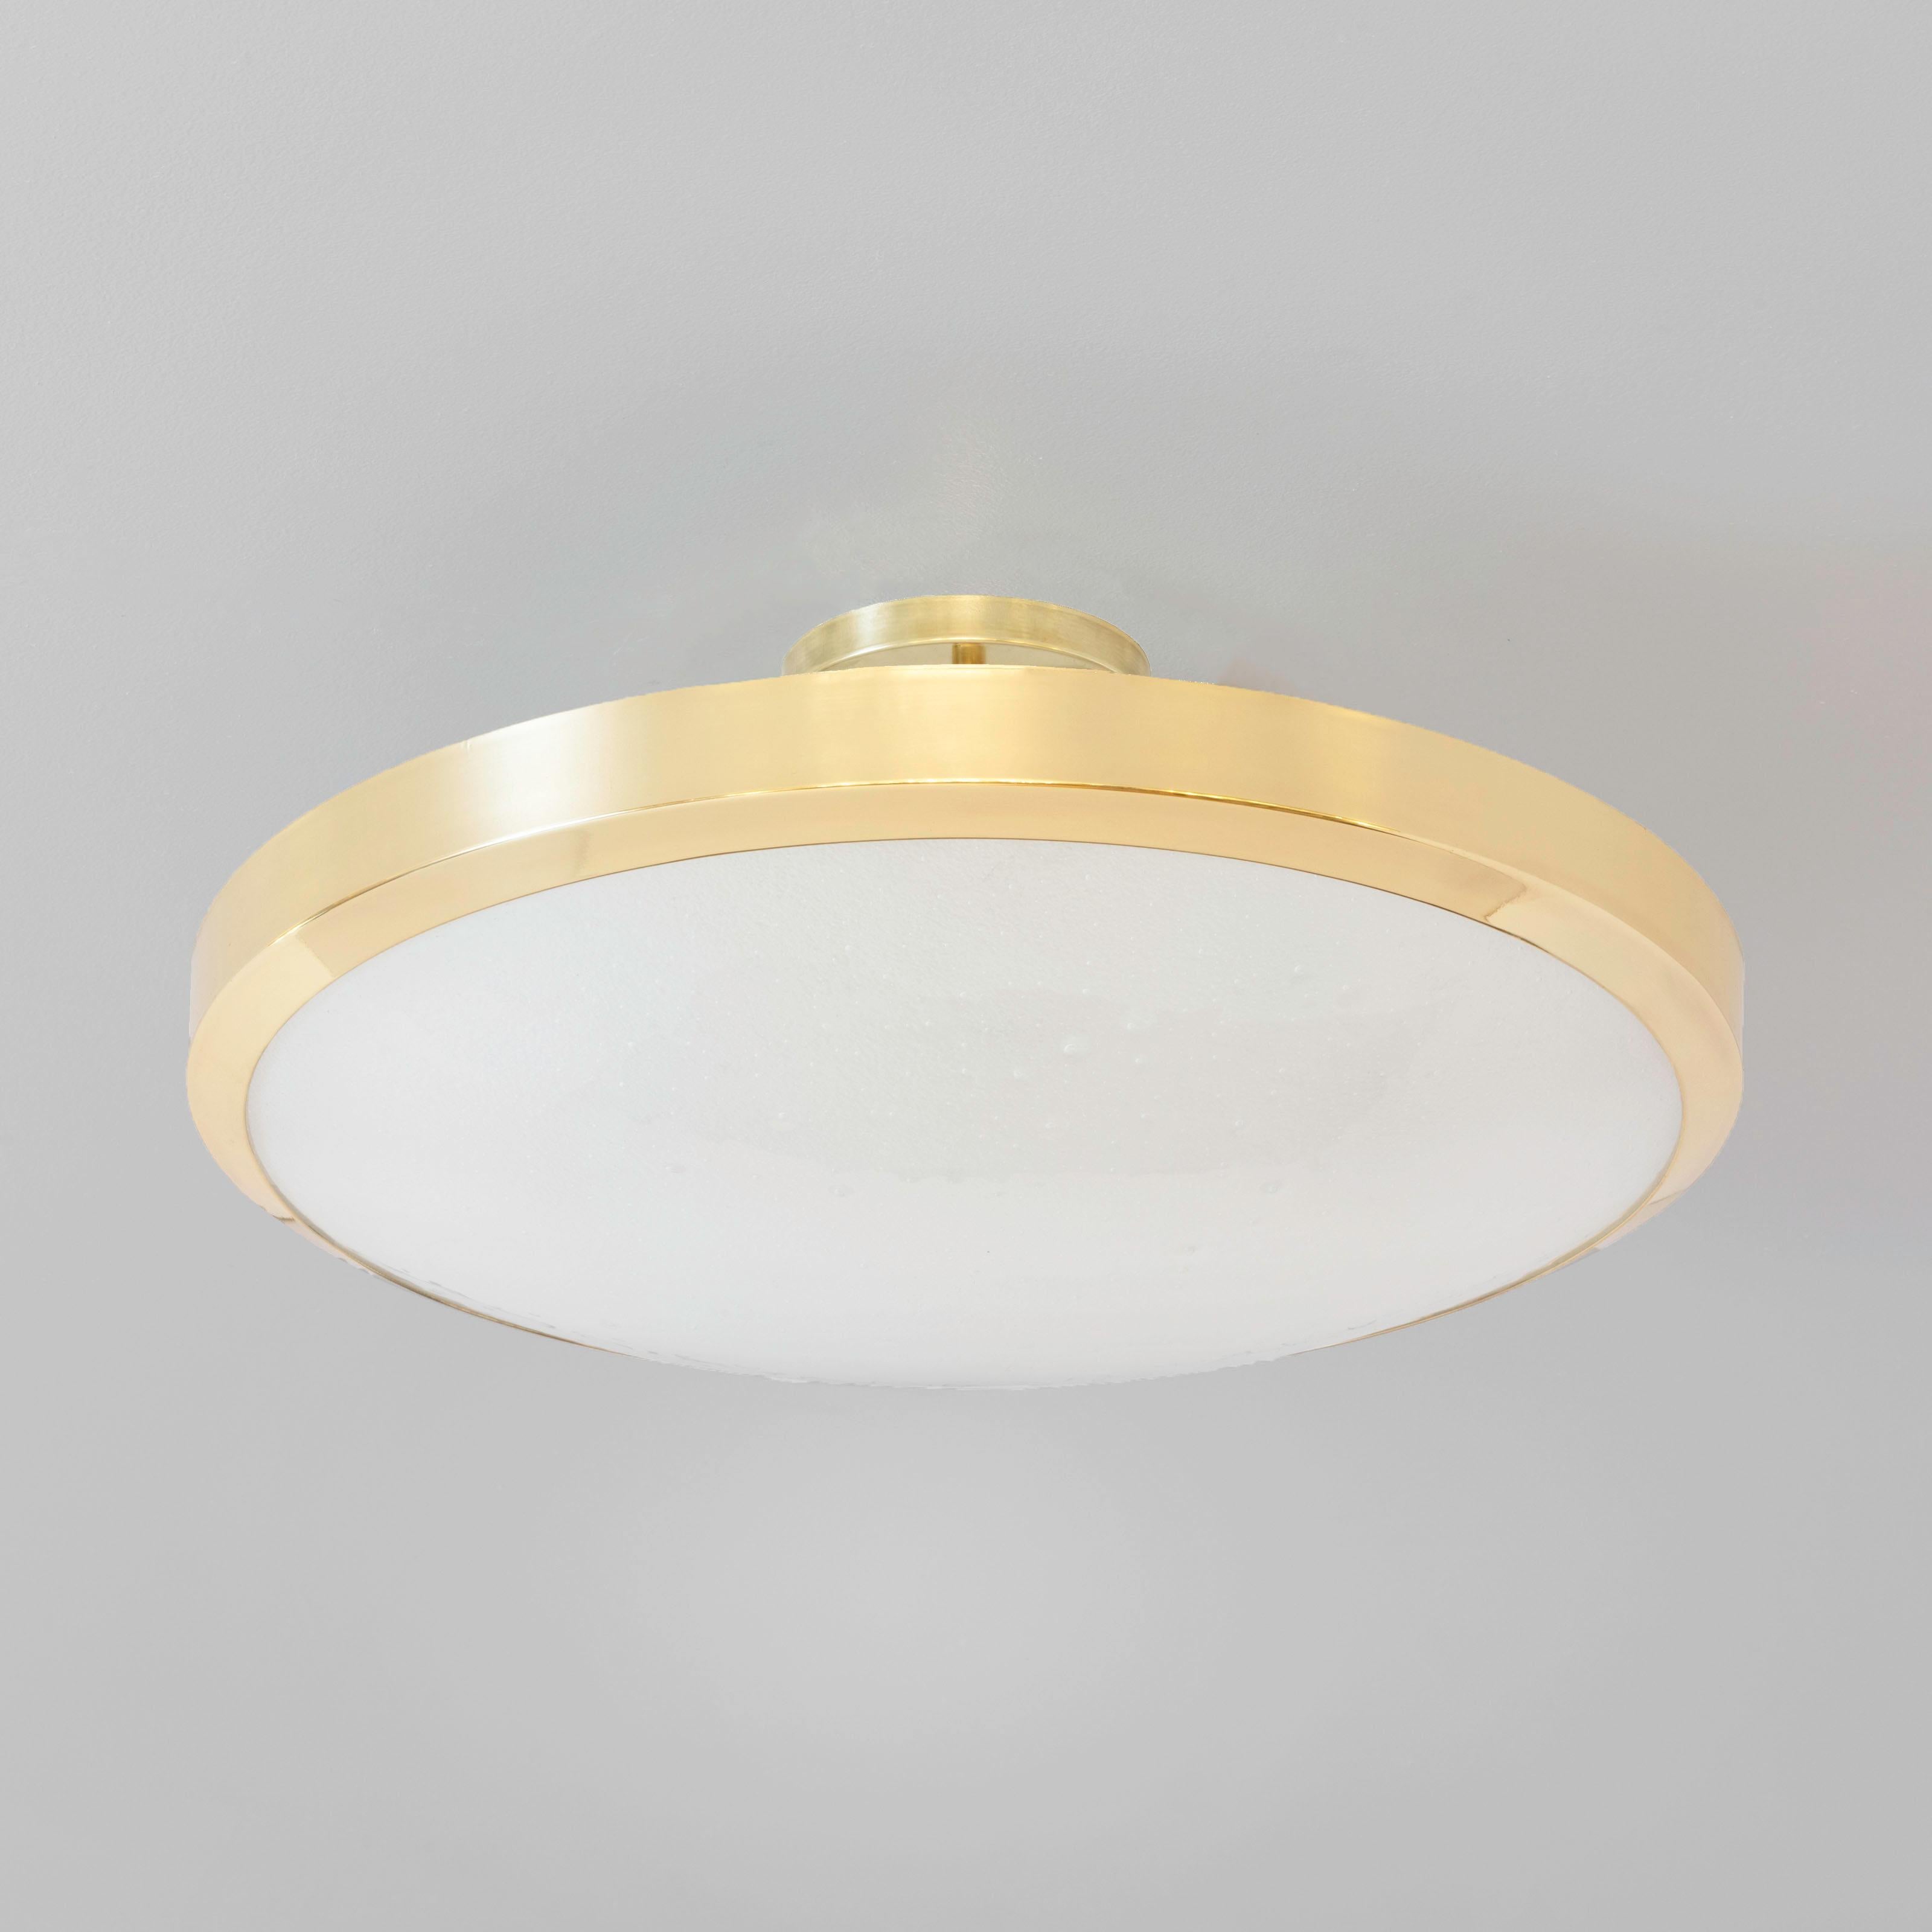 The Uno Grande ceiling light is the largest member of Uno family. It exemplifies simple elegance via its clean profile designed around a single Murano glass shade. Shown in polished brass with our signature Murano bubble glass. See the Uno Classico